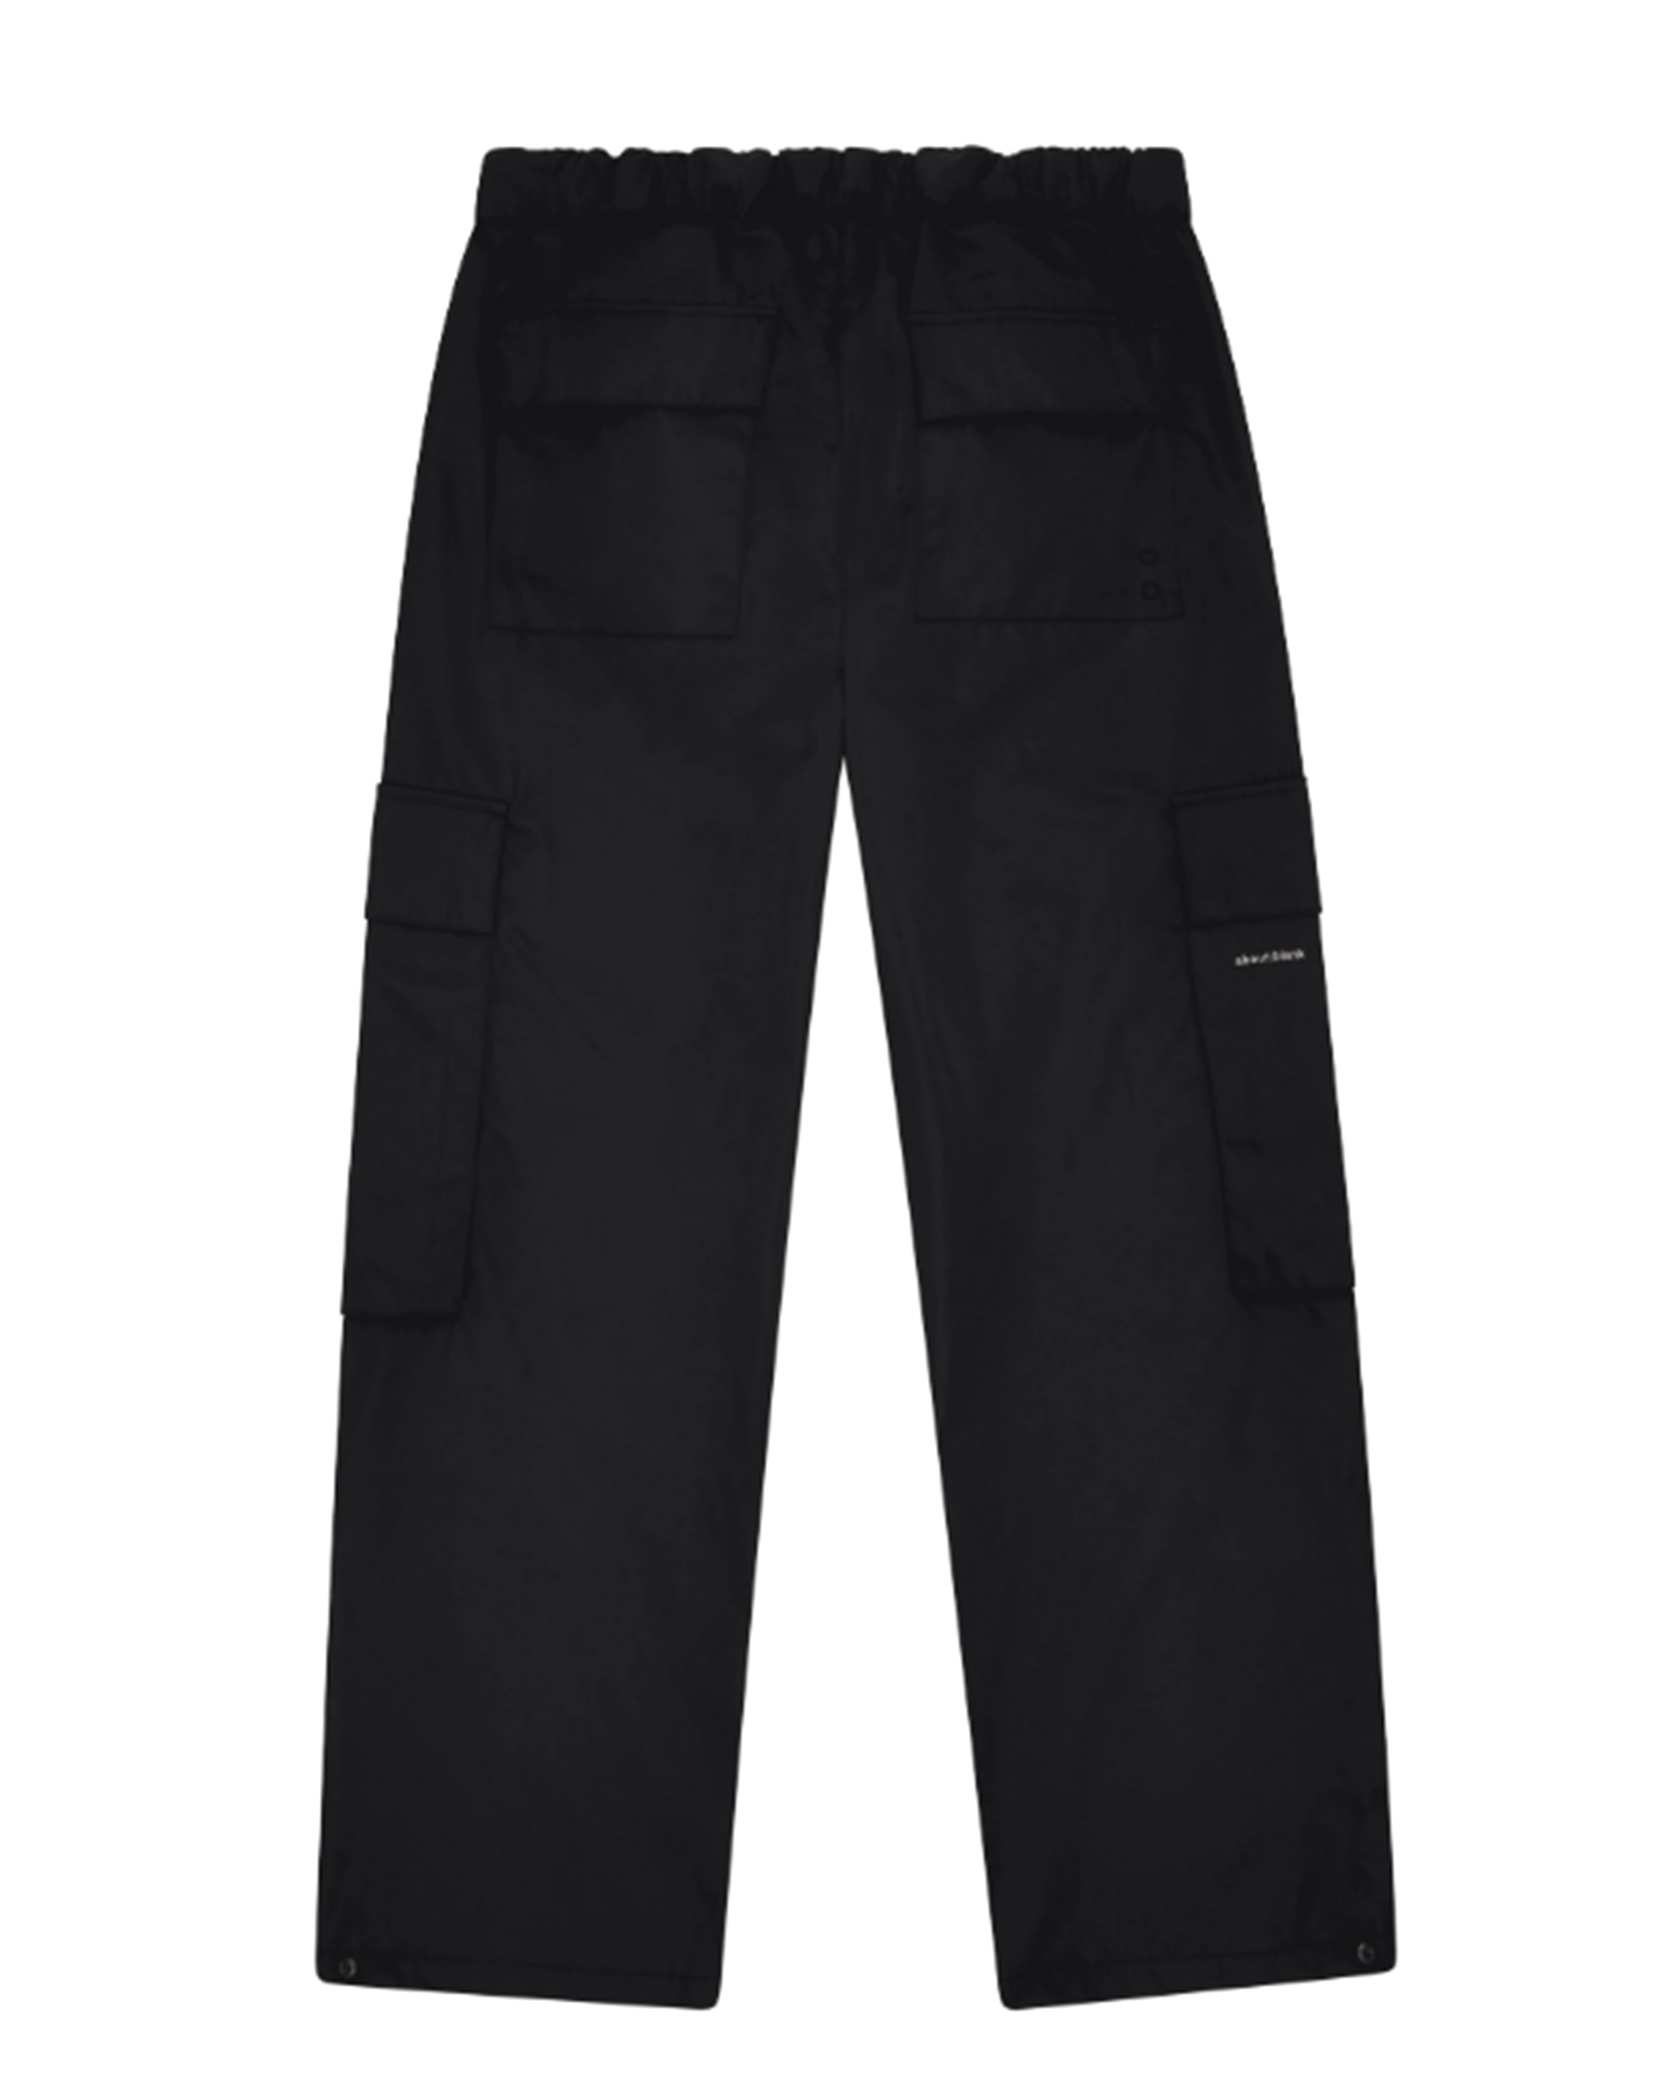 About blank - utility pant black